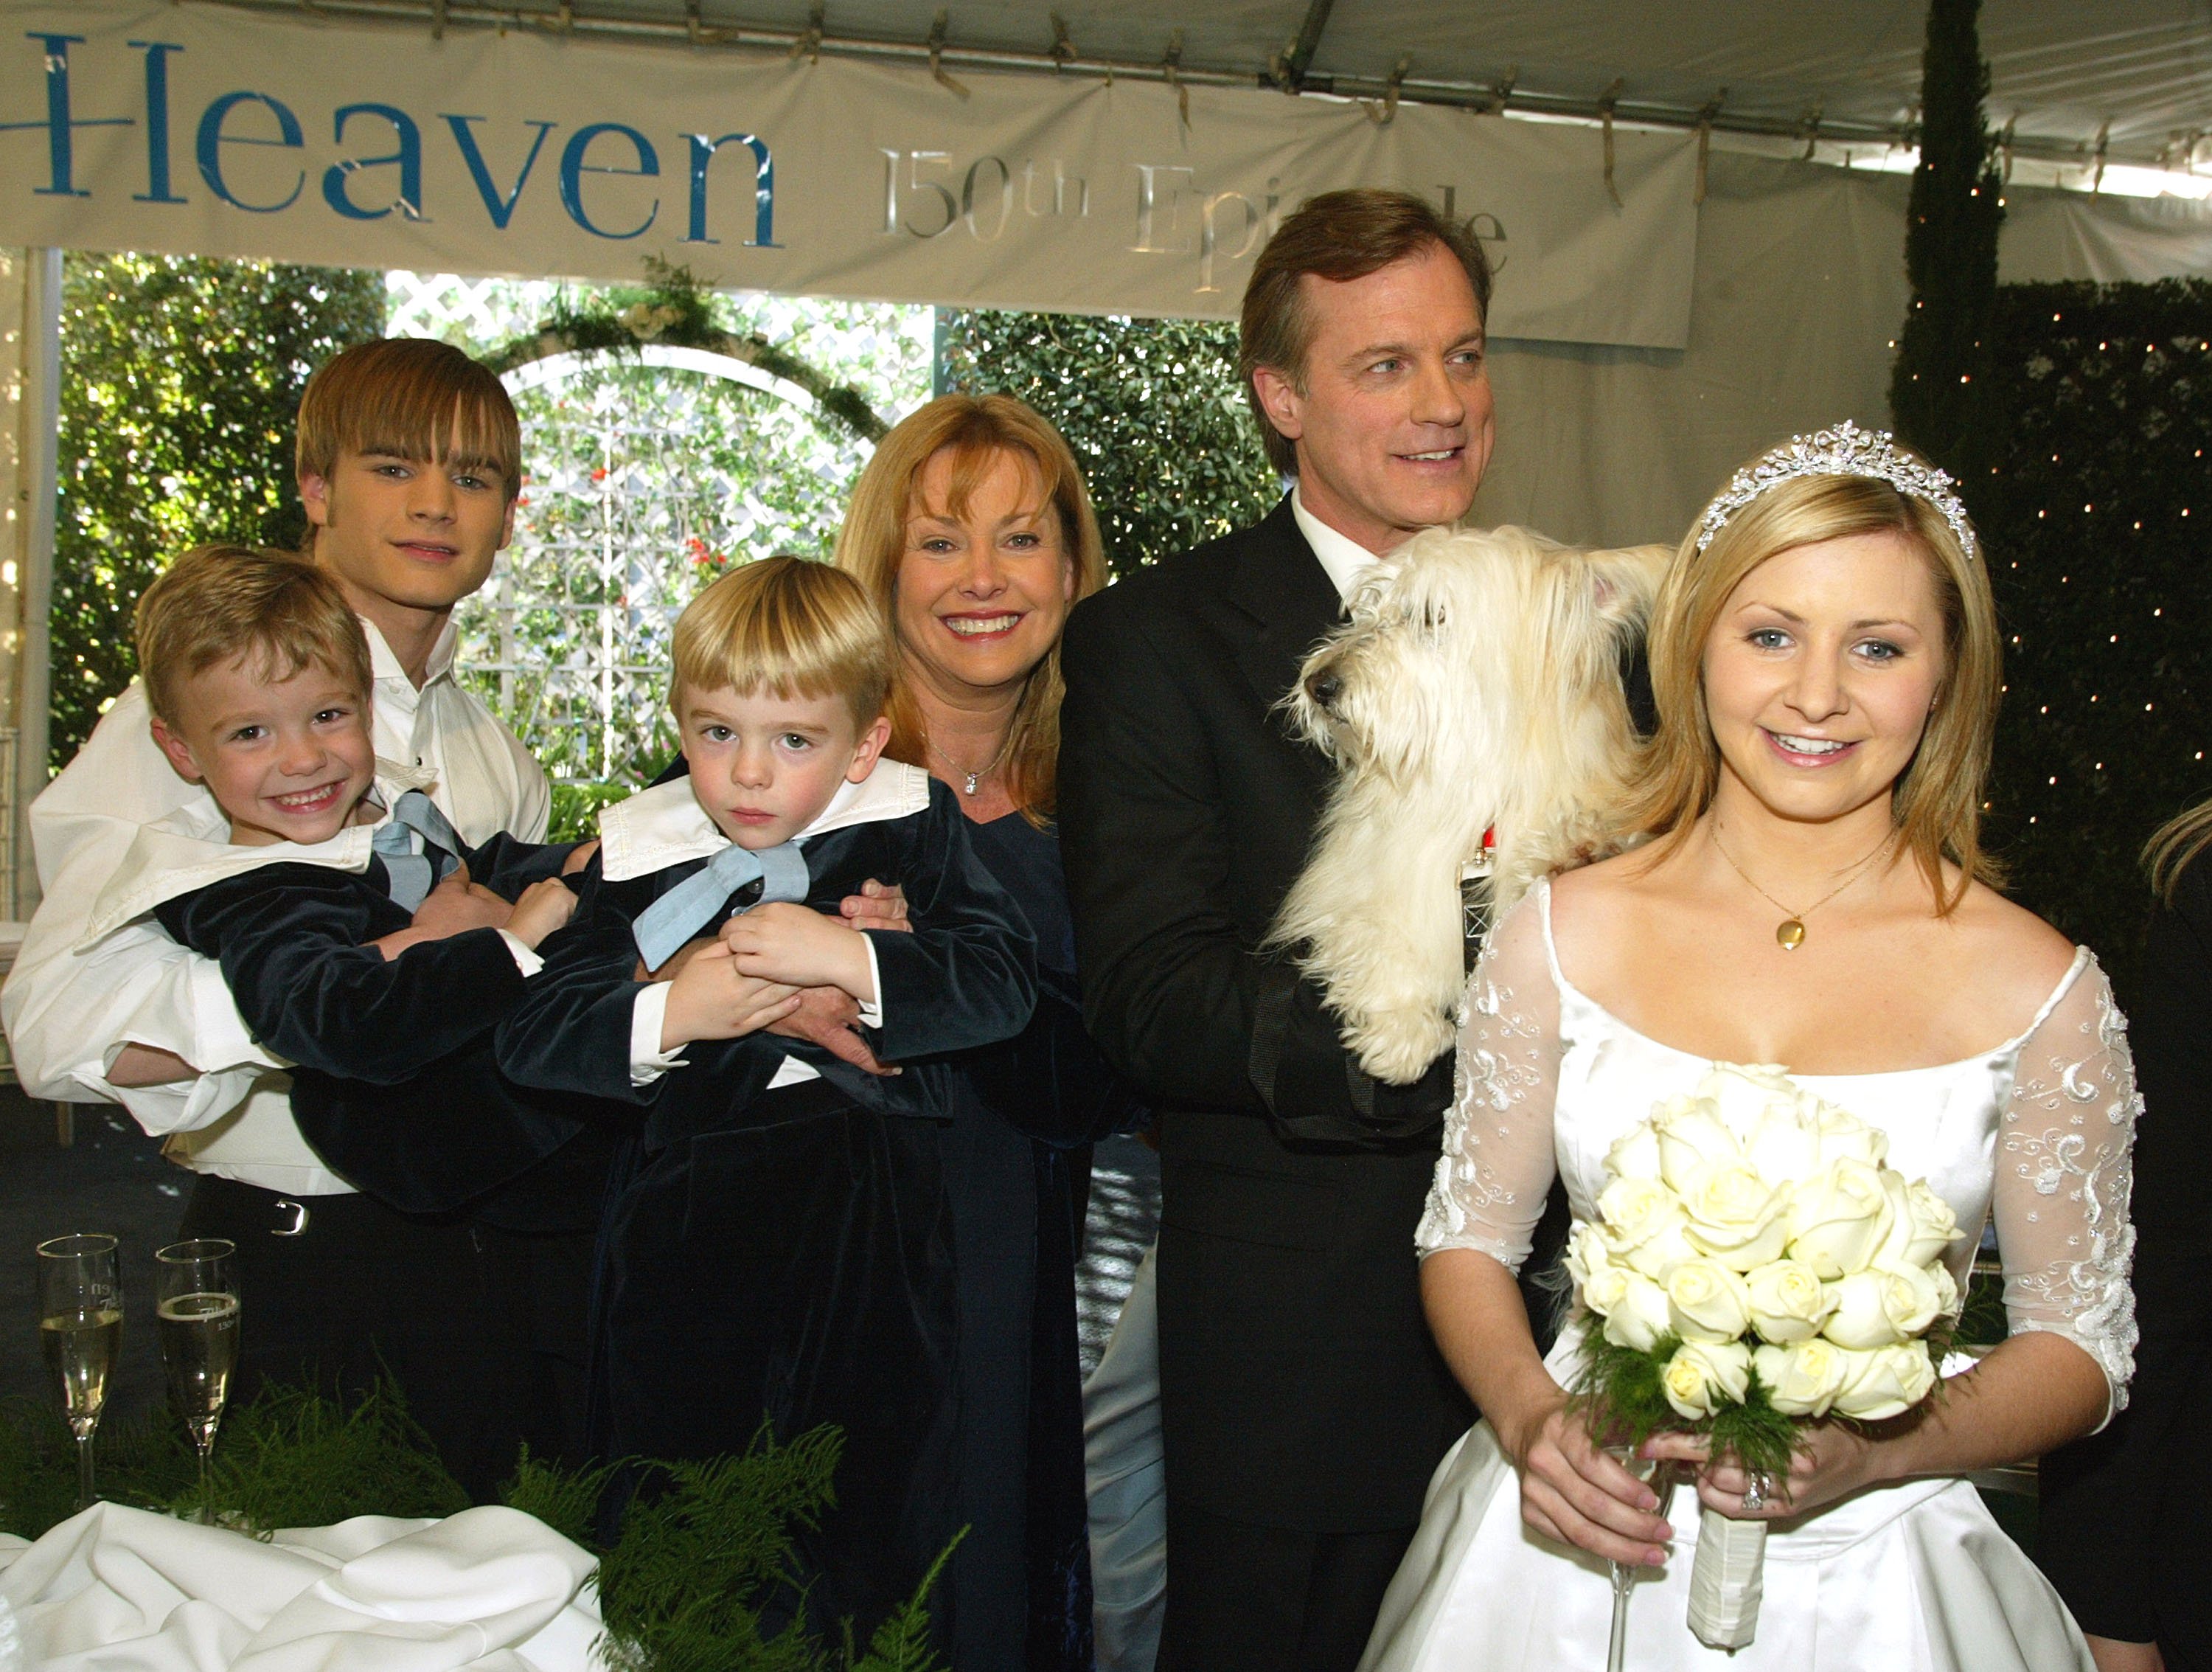 David Gallagher, twins Lorenzo and Nikolas Brino, Catherine Hicks, Stephen Collins, and Beverley Mitchell pose at a reception to celebrate 150 episodes of "7th Heaven" on February 20, 2003 in Los Angeles, California | Photo: Kevin Winter/Getty Images)